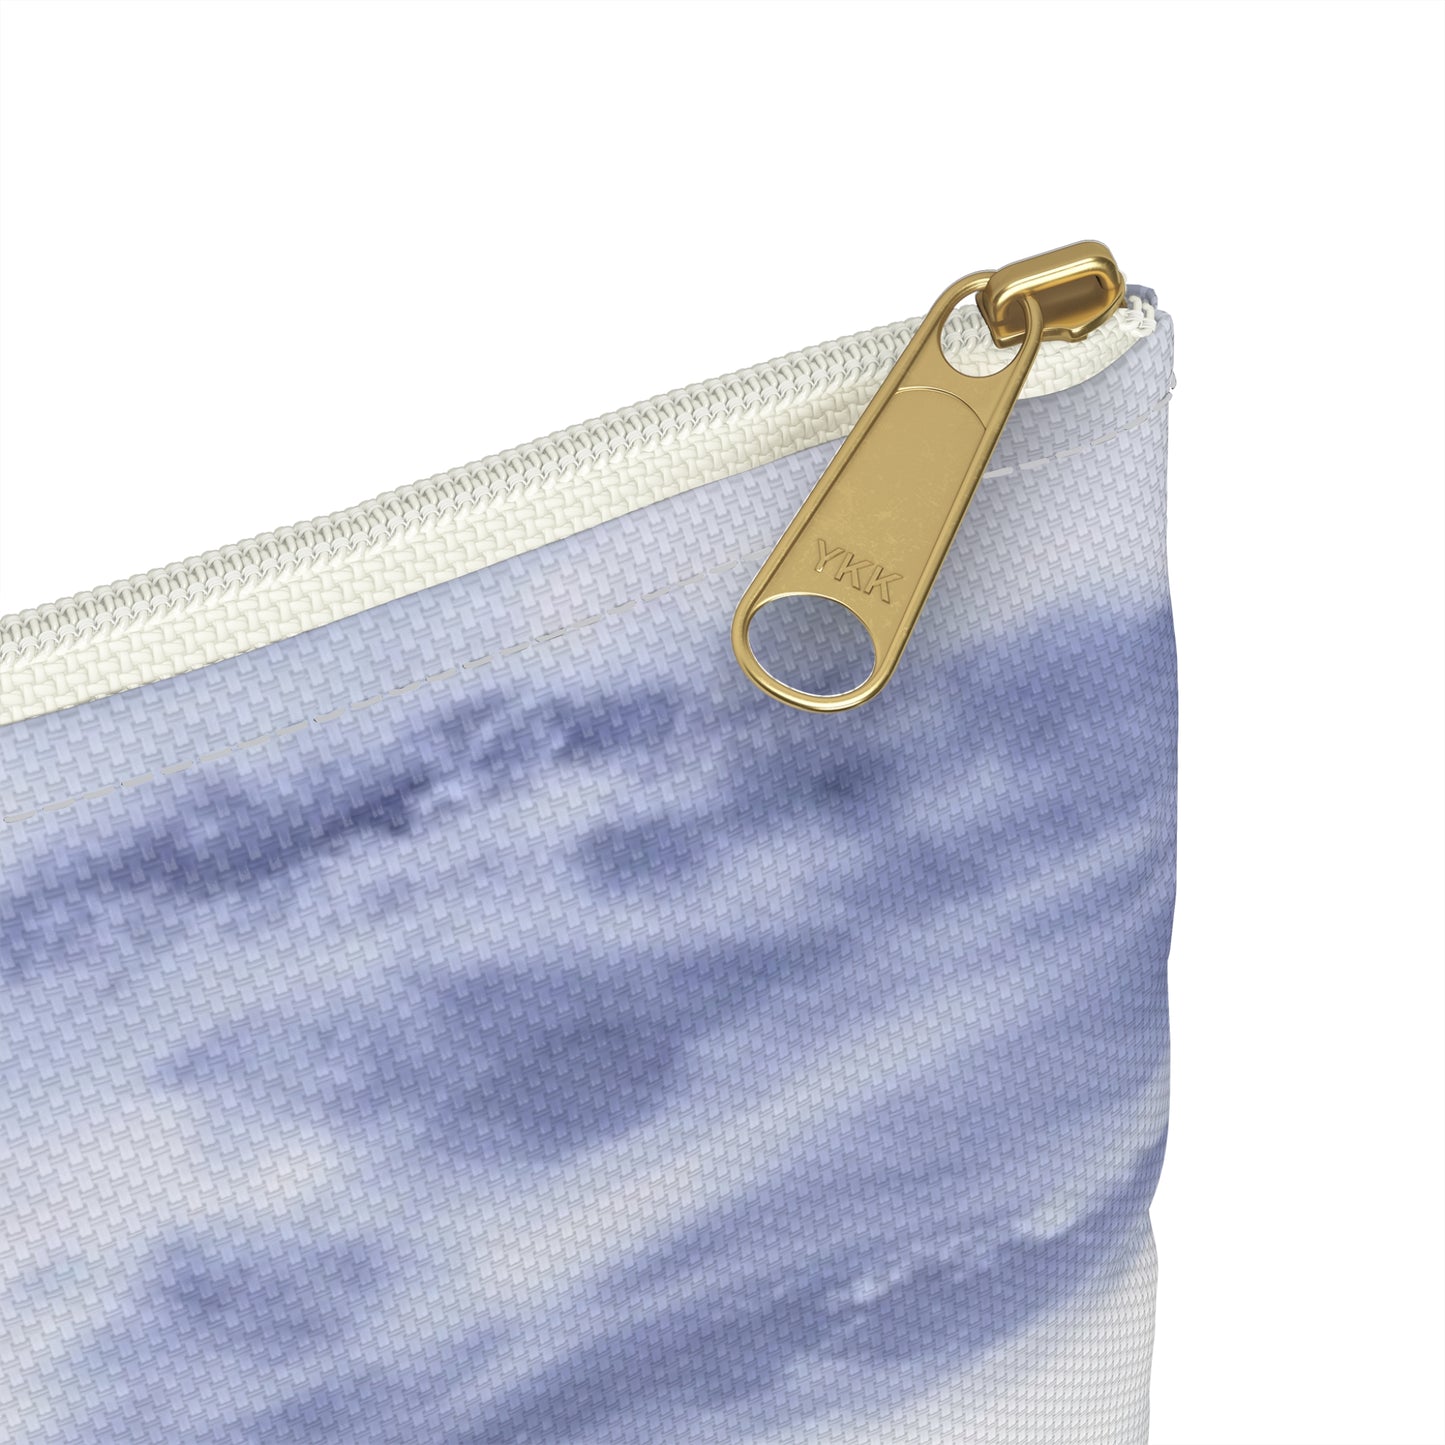 Inky blue clouds accessory pouch